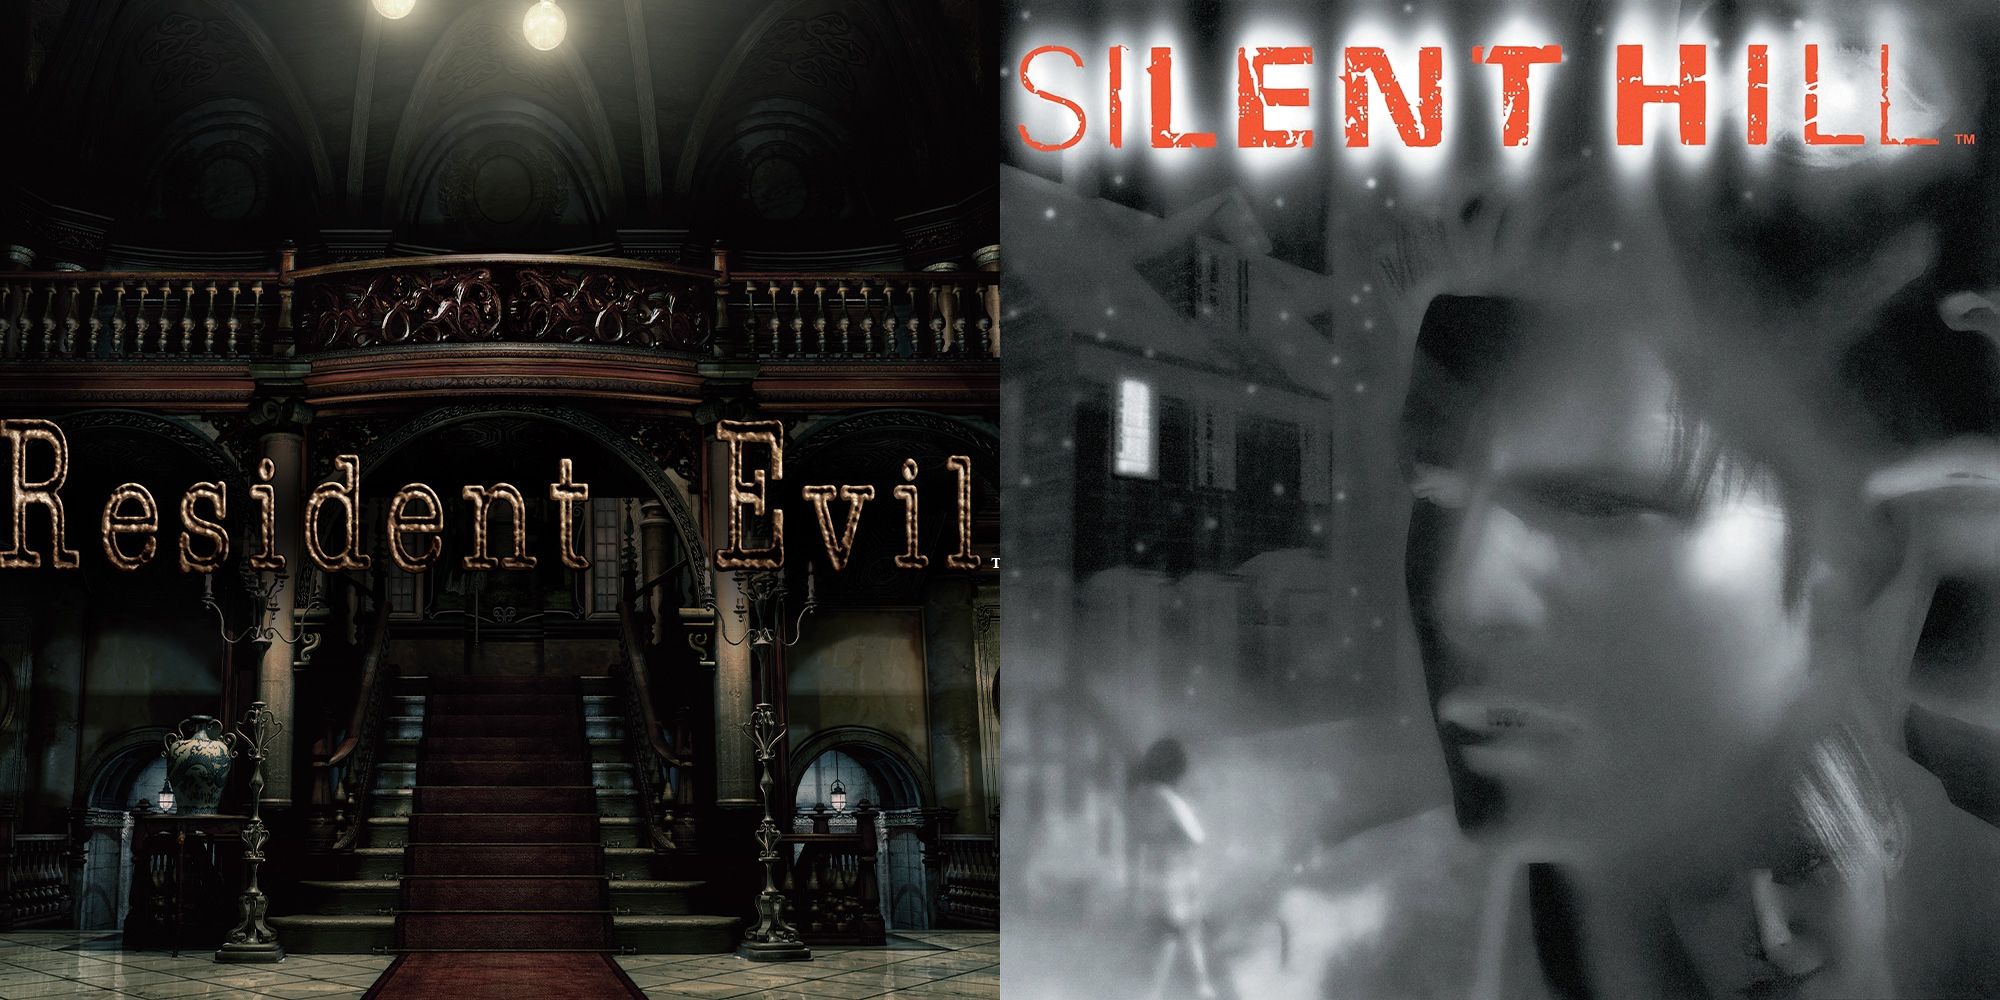 X The Best Puzzles Based On Music In Video Games Split Image Resident Evil Silent Hill Cover Art